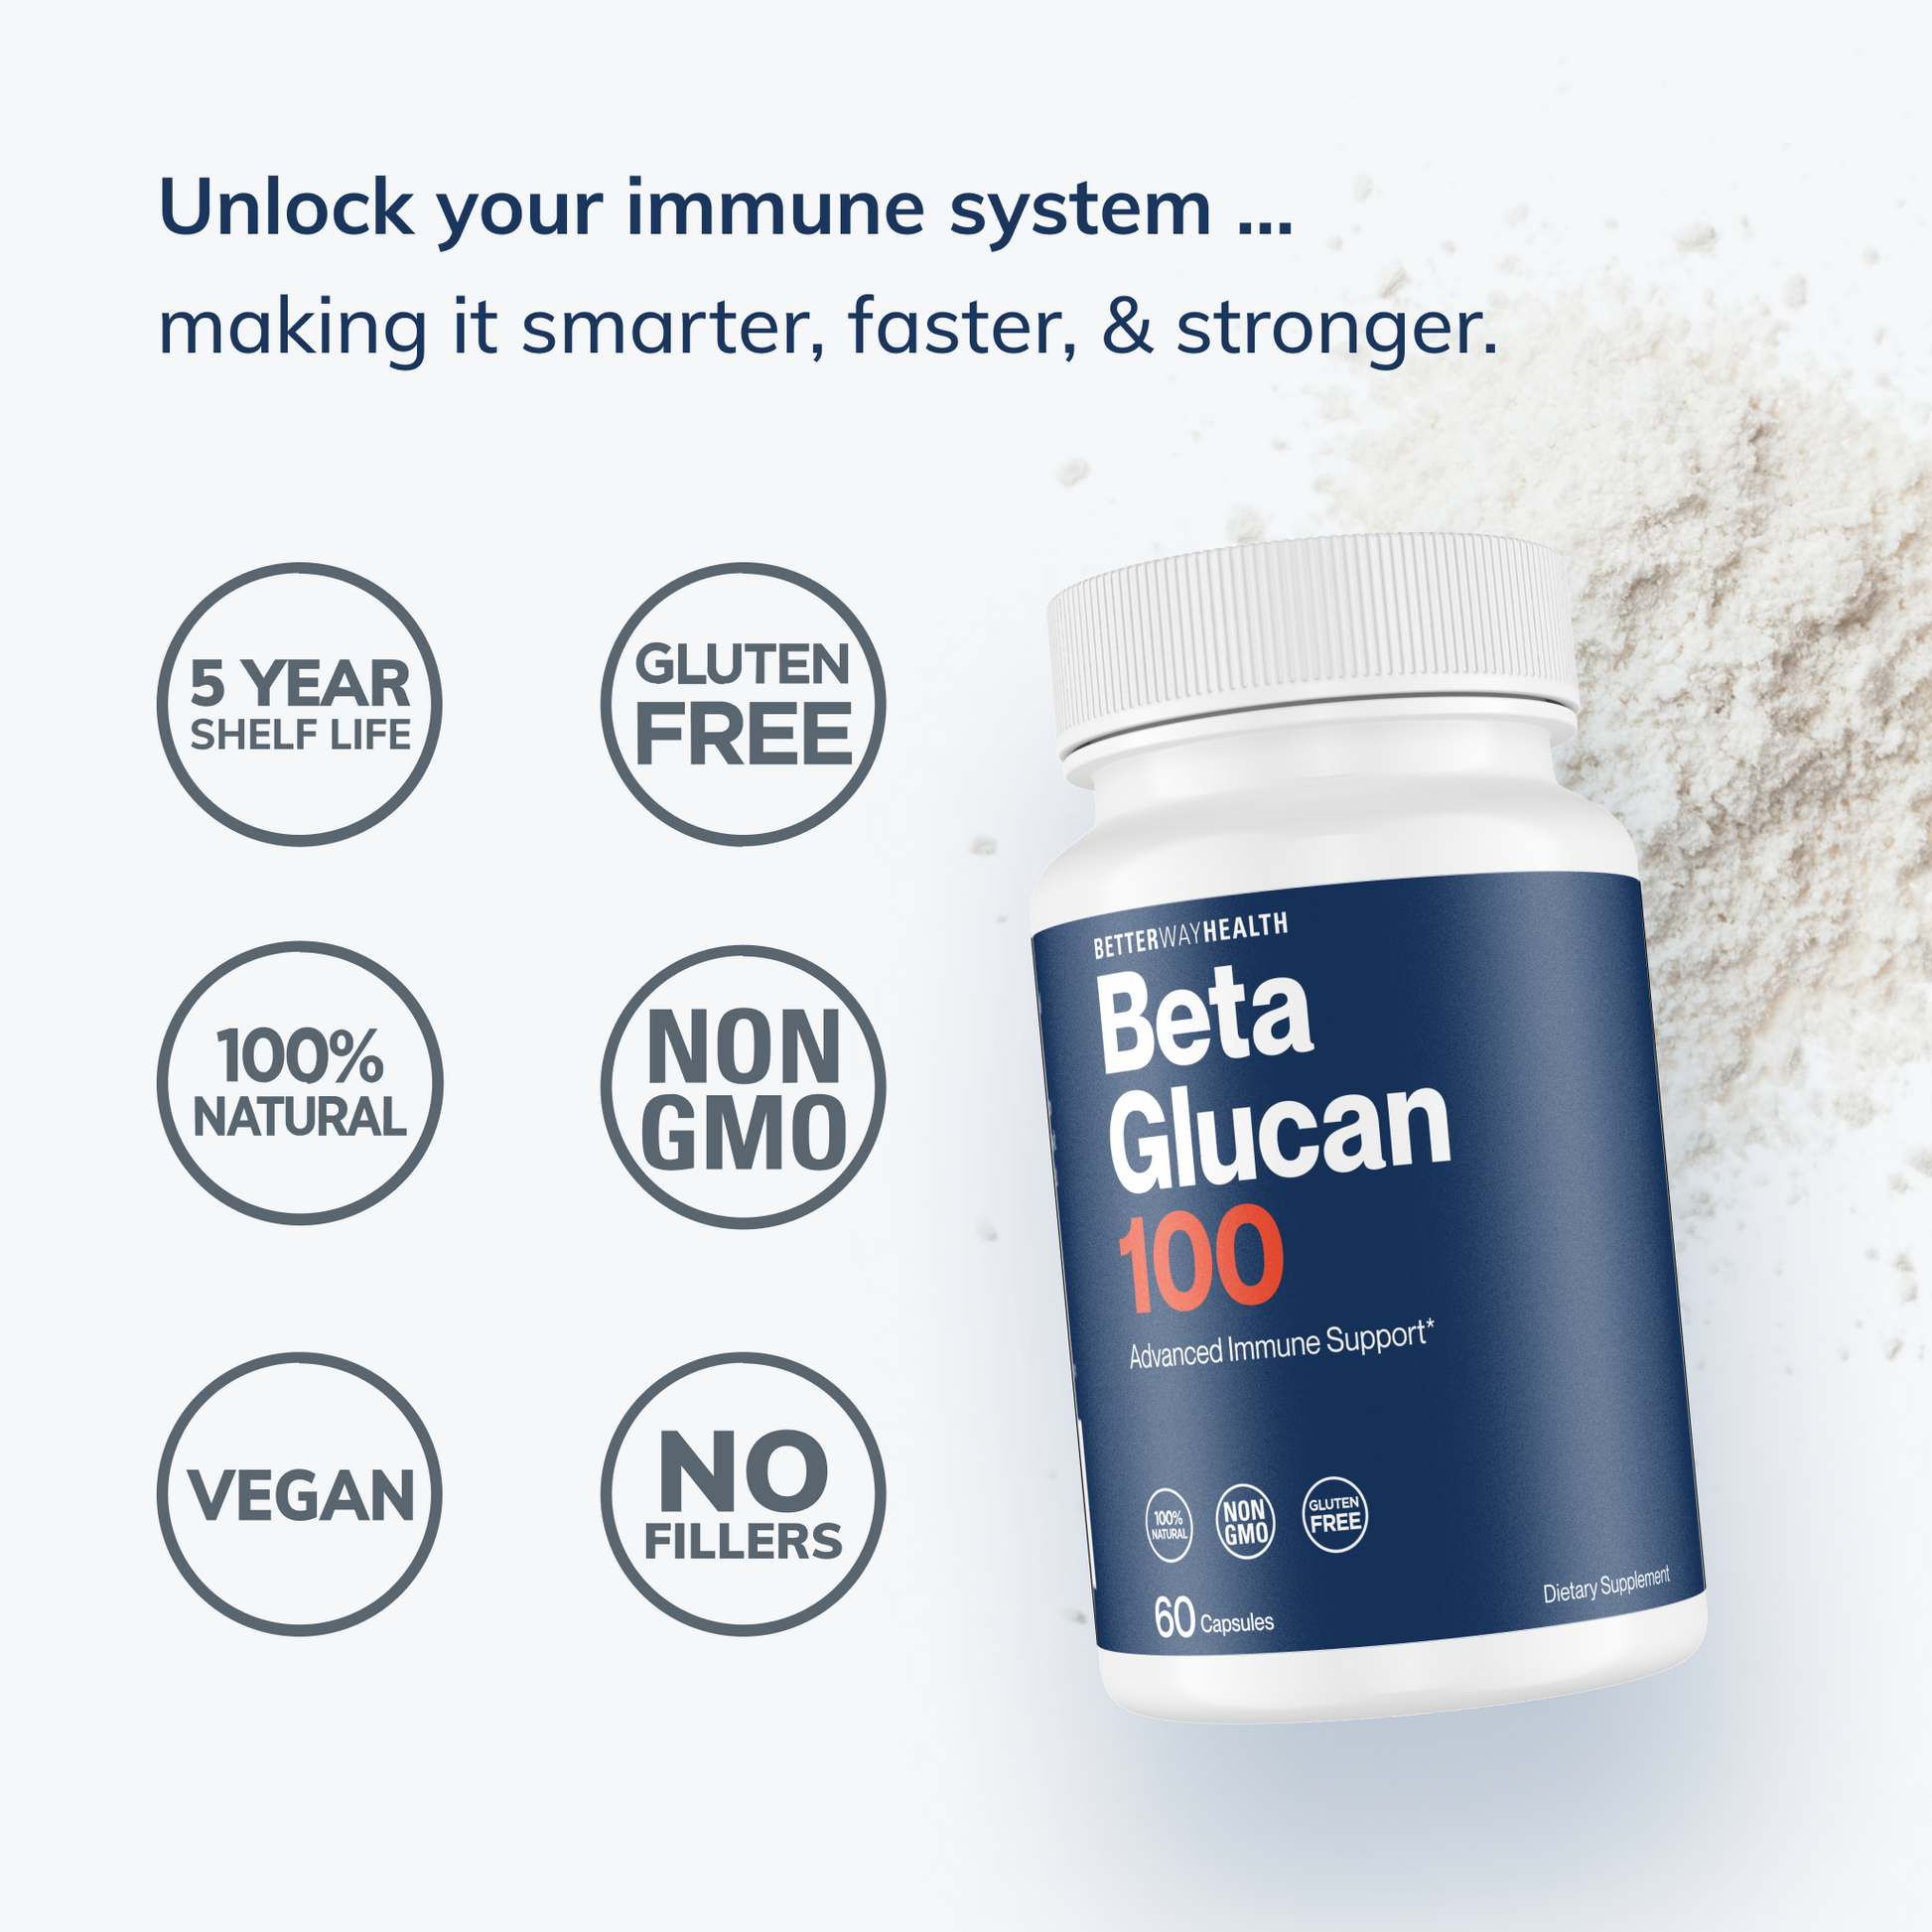 Infographic showing the top benefits of using beta glucan 100